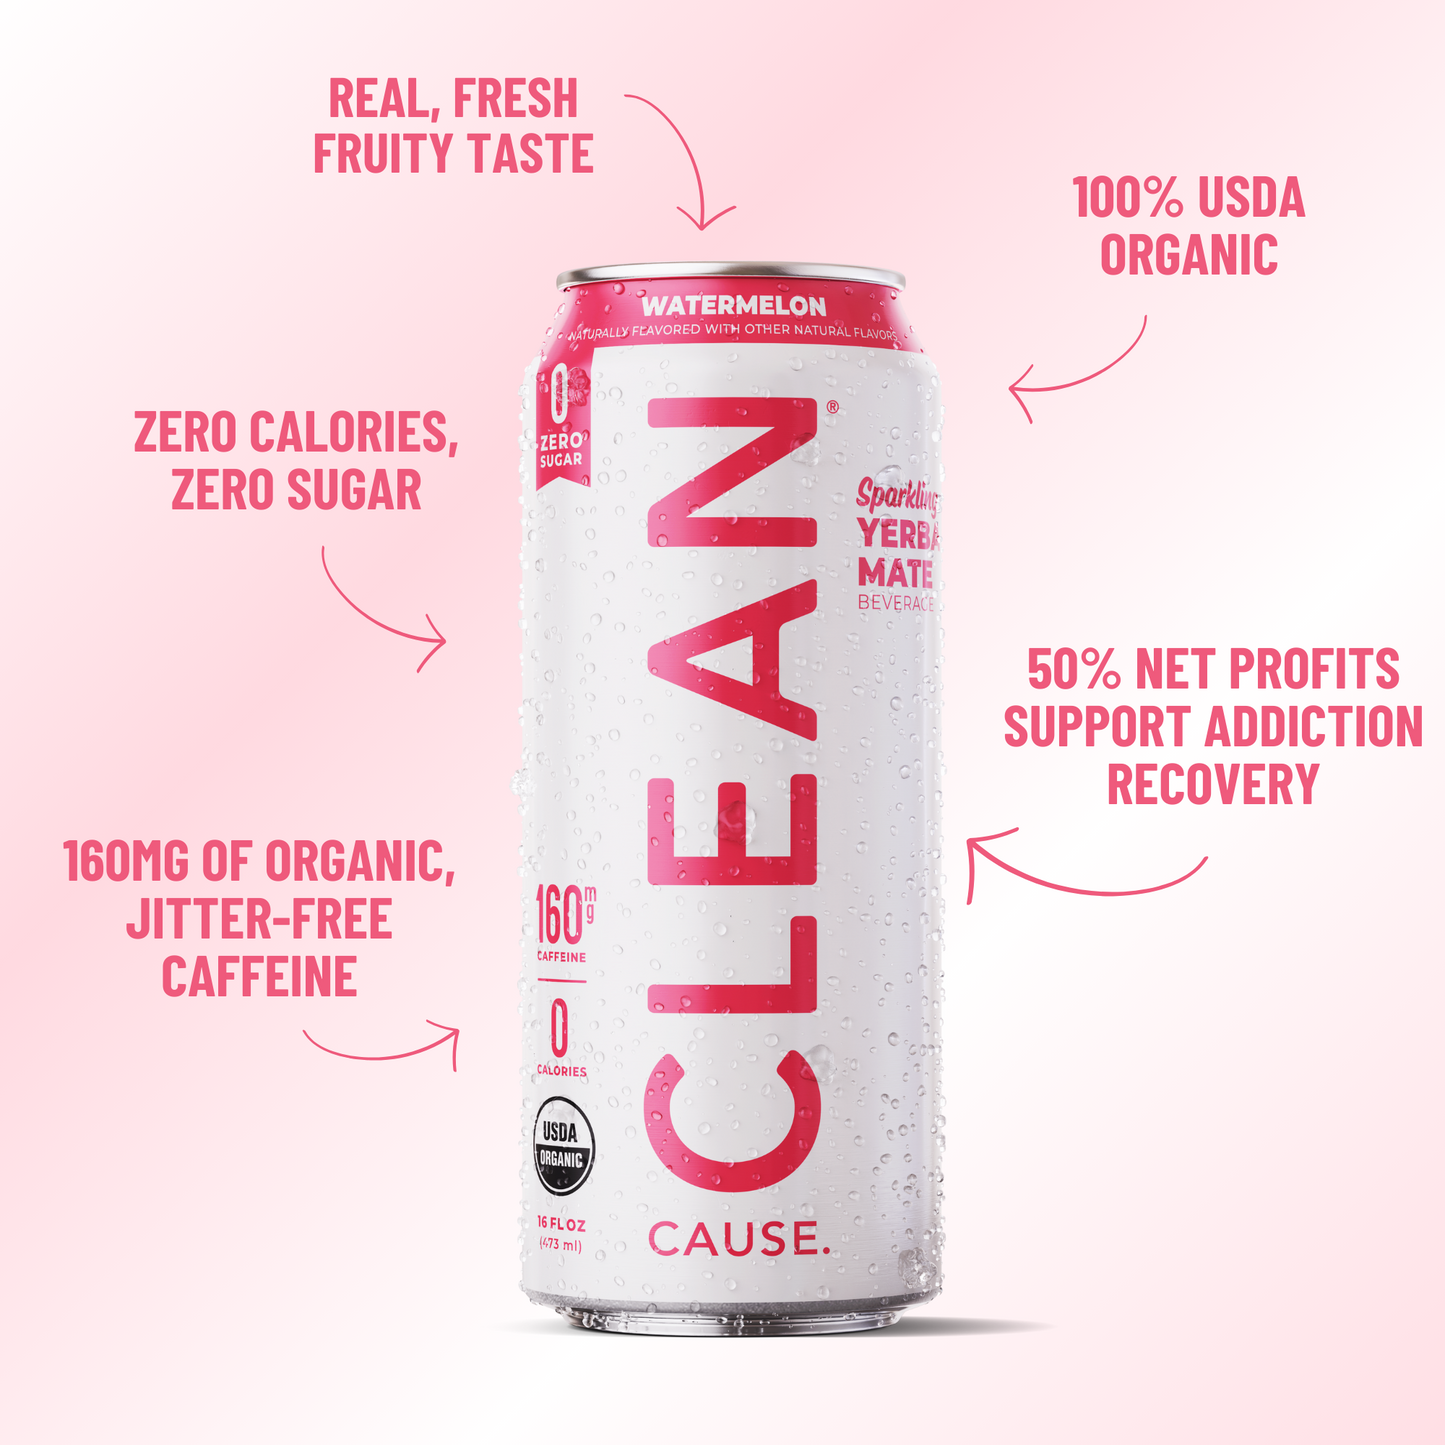 A can of CLEAN Cause Watermelon Yerba Mate with little attributes circling it: 160mg of organic jitter-free caffeine, zero calories zero sugar, real fresh fruity taste, 100% USDA organic, 50% net profits support addiction recovery